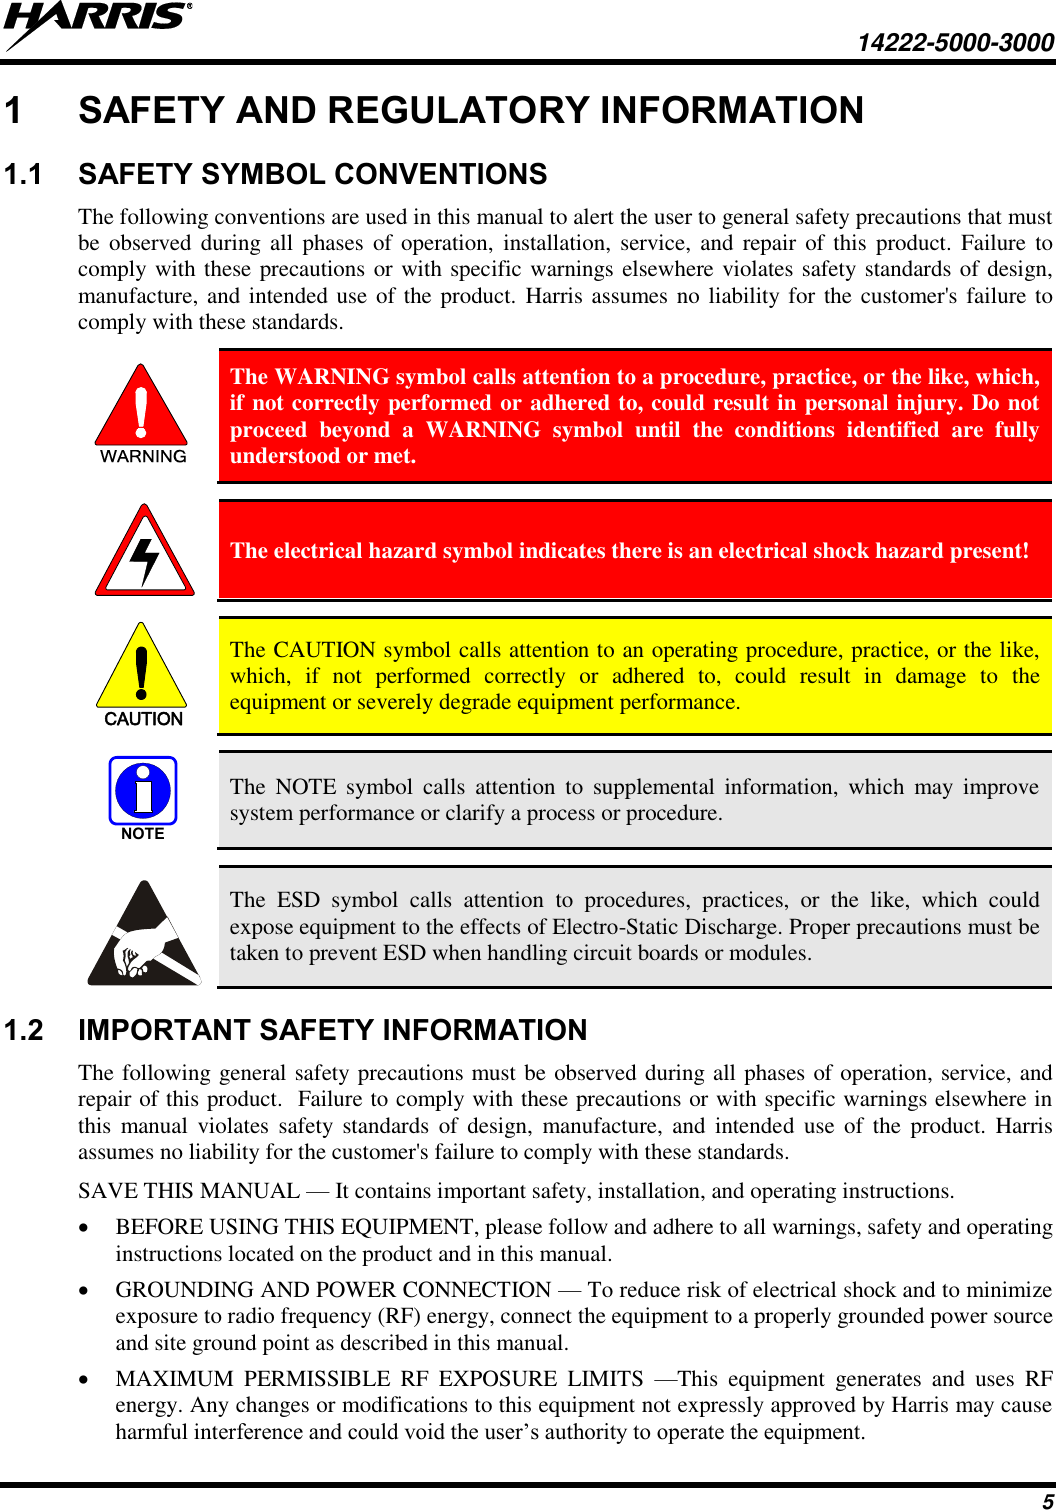     14222-5000-3000 5 1  SAFETY AND REGULATORY INFORMATION 1.1  SAFETY SYMBOL CONVENTIONS The following conventions are used in this manual to alert the user to general safety precautions that must be  observed during all  phases  of operation,  installation,  service,  and  repair  of this  product. Failure to comply with these precautions or with specific warnings elsewhere violates safety standards of design, manufacture, and intended use of the product.  Harris assumes no liability for the customer&apos;s failure to comply with these standards. WARNING The WARNING symbol calls attention to a procedure, practice, or the like, which, if not correctly performed or adhered to, could result in personal injury. Do not proceed  beyond  a  WARNING  symbol  until  the  conditions  identified  are  fully understood or met.   The electrical hazard symbol indicates there is an electrical shock hazard present!  CAUTION The CAUTION symbol calls attention to an operating procedure, practice, or the like, which,  if  not  performed  correctly  or  adhered  to,  could  result  in  damage  to  the equipment or severely degrade equipment performance.  NOTE The  NOTE  symbol  calls  attention  to  supplemental  information,  which  may  improve system performance or clarify a process or procedure.   The  ESD  symbol  calls  attention  to  procedures,  practices,  or  the  like,  which  could expose equipment to the effects of Electro-Static Discharge. Proper precautions must be taken to prevent ESD when handling circuit boards or modules. 1.2  IMPORTANT SAFETY INFORMATION The following general safety precautions must be observed during all phases of operation, service, and repair of this product.  Failure to comply with these precautions or with specific warnings elsewhere in this  manual  violates  safety standards  of  design,  manufacture, and  intended  use  of  the  product. Harris assumes no liability for the customer&apos;s failure to comply with these standards. SAVE THIS MANUAL — It contains important safety, installation, and operating instructions.  BEFORE USING THIS EQUIPMENT, please follow and adhere to all warnings, safety and operating instructions located on the product and in this manual.  GROUNDING AND POWER CONNECTION — To reduce risk of electrical shock and to minimize exposure to radio frequency (RF) energy, connect the equipment to a properly grounded power source and site ground point as described in this manual.  MAXIMUM  PERMISSIBLE  RF  EXPOSURE  LIMITS  —This  equipment  generates  and  uses  RF energy. Any changes or modifications to this equipment not expressly approved by Harris may cause harmful interference and could void the user’s authority to operate the equipment. 